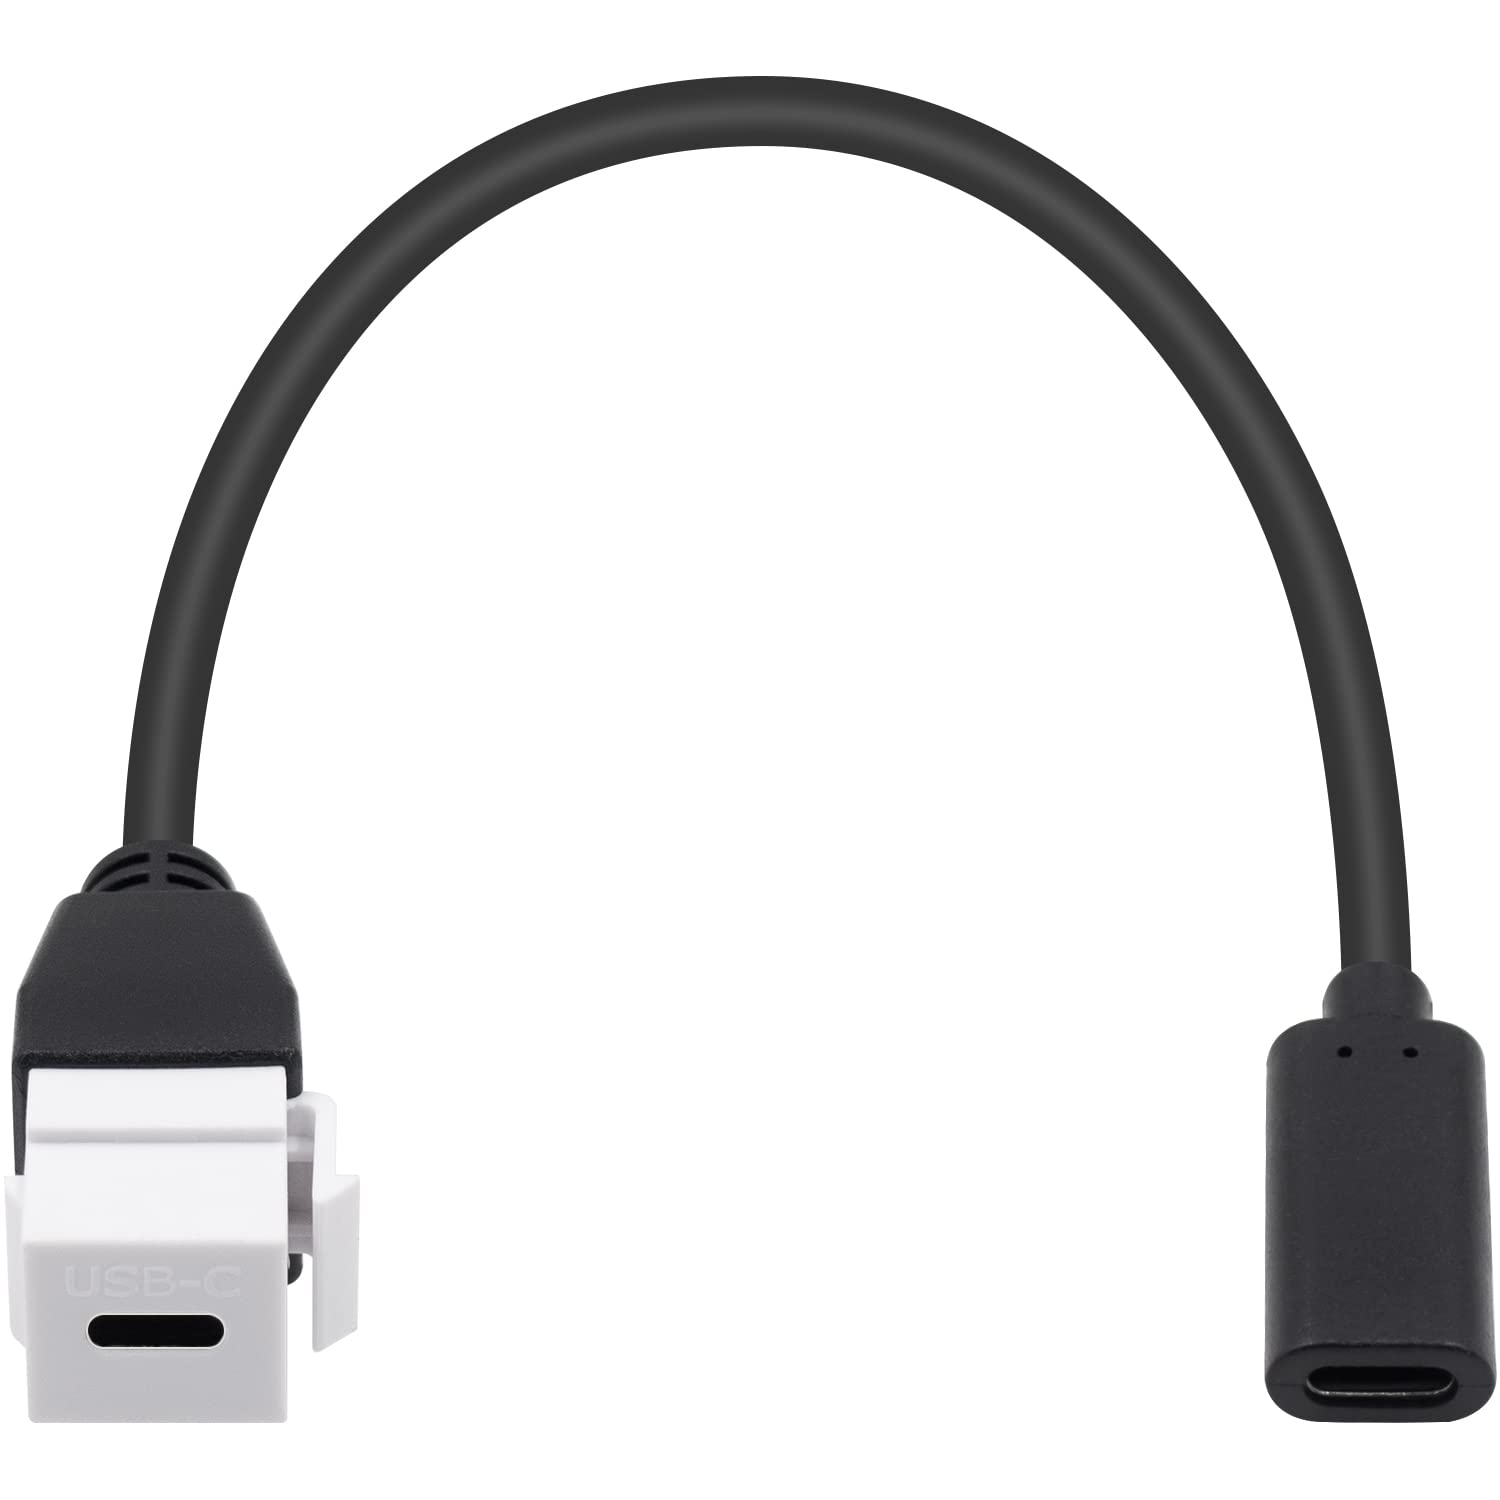 USB C Keystone Jack Insert Cable for Wall Plate Outlet Panel